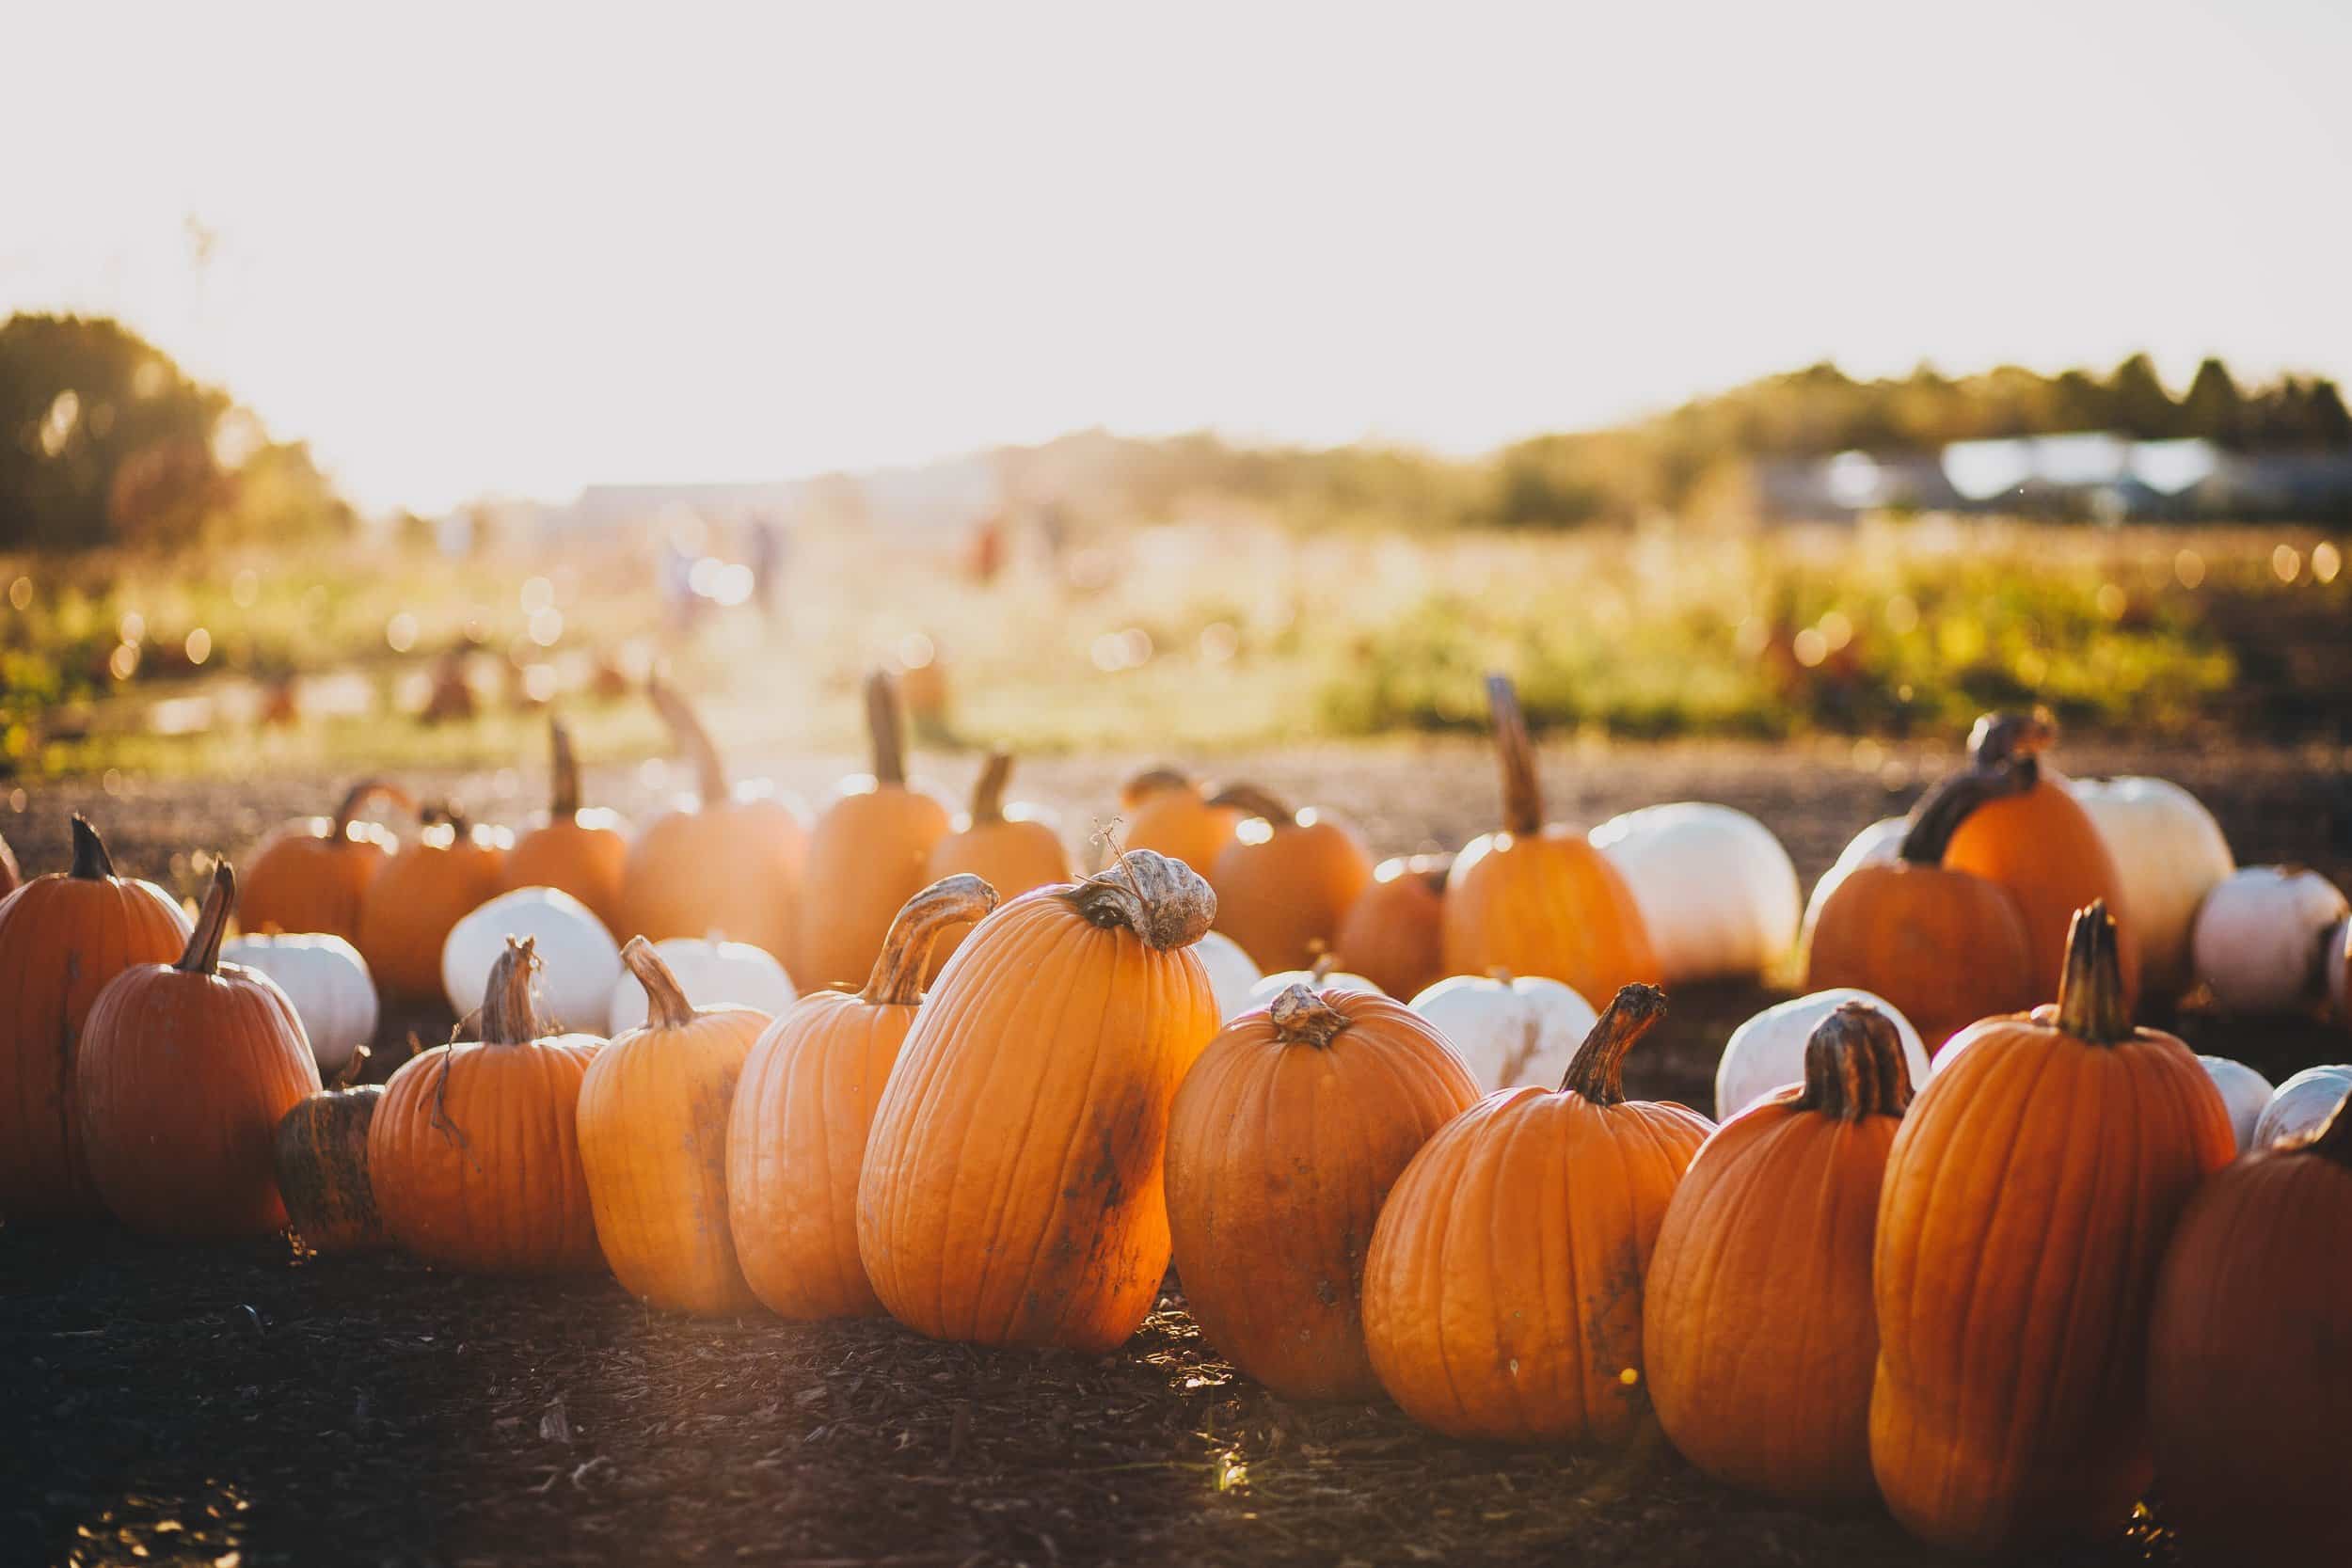 Freshly plucked pumpkins from a patch.Source: unsplash.com